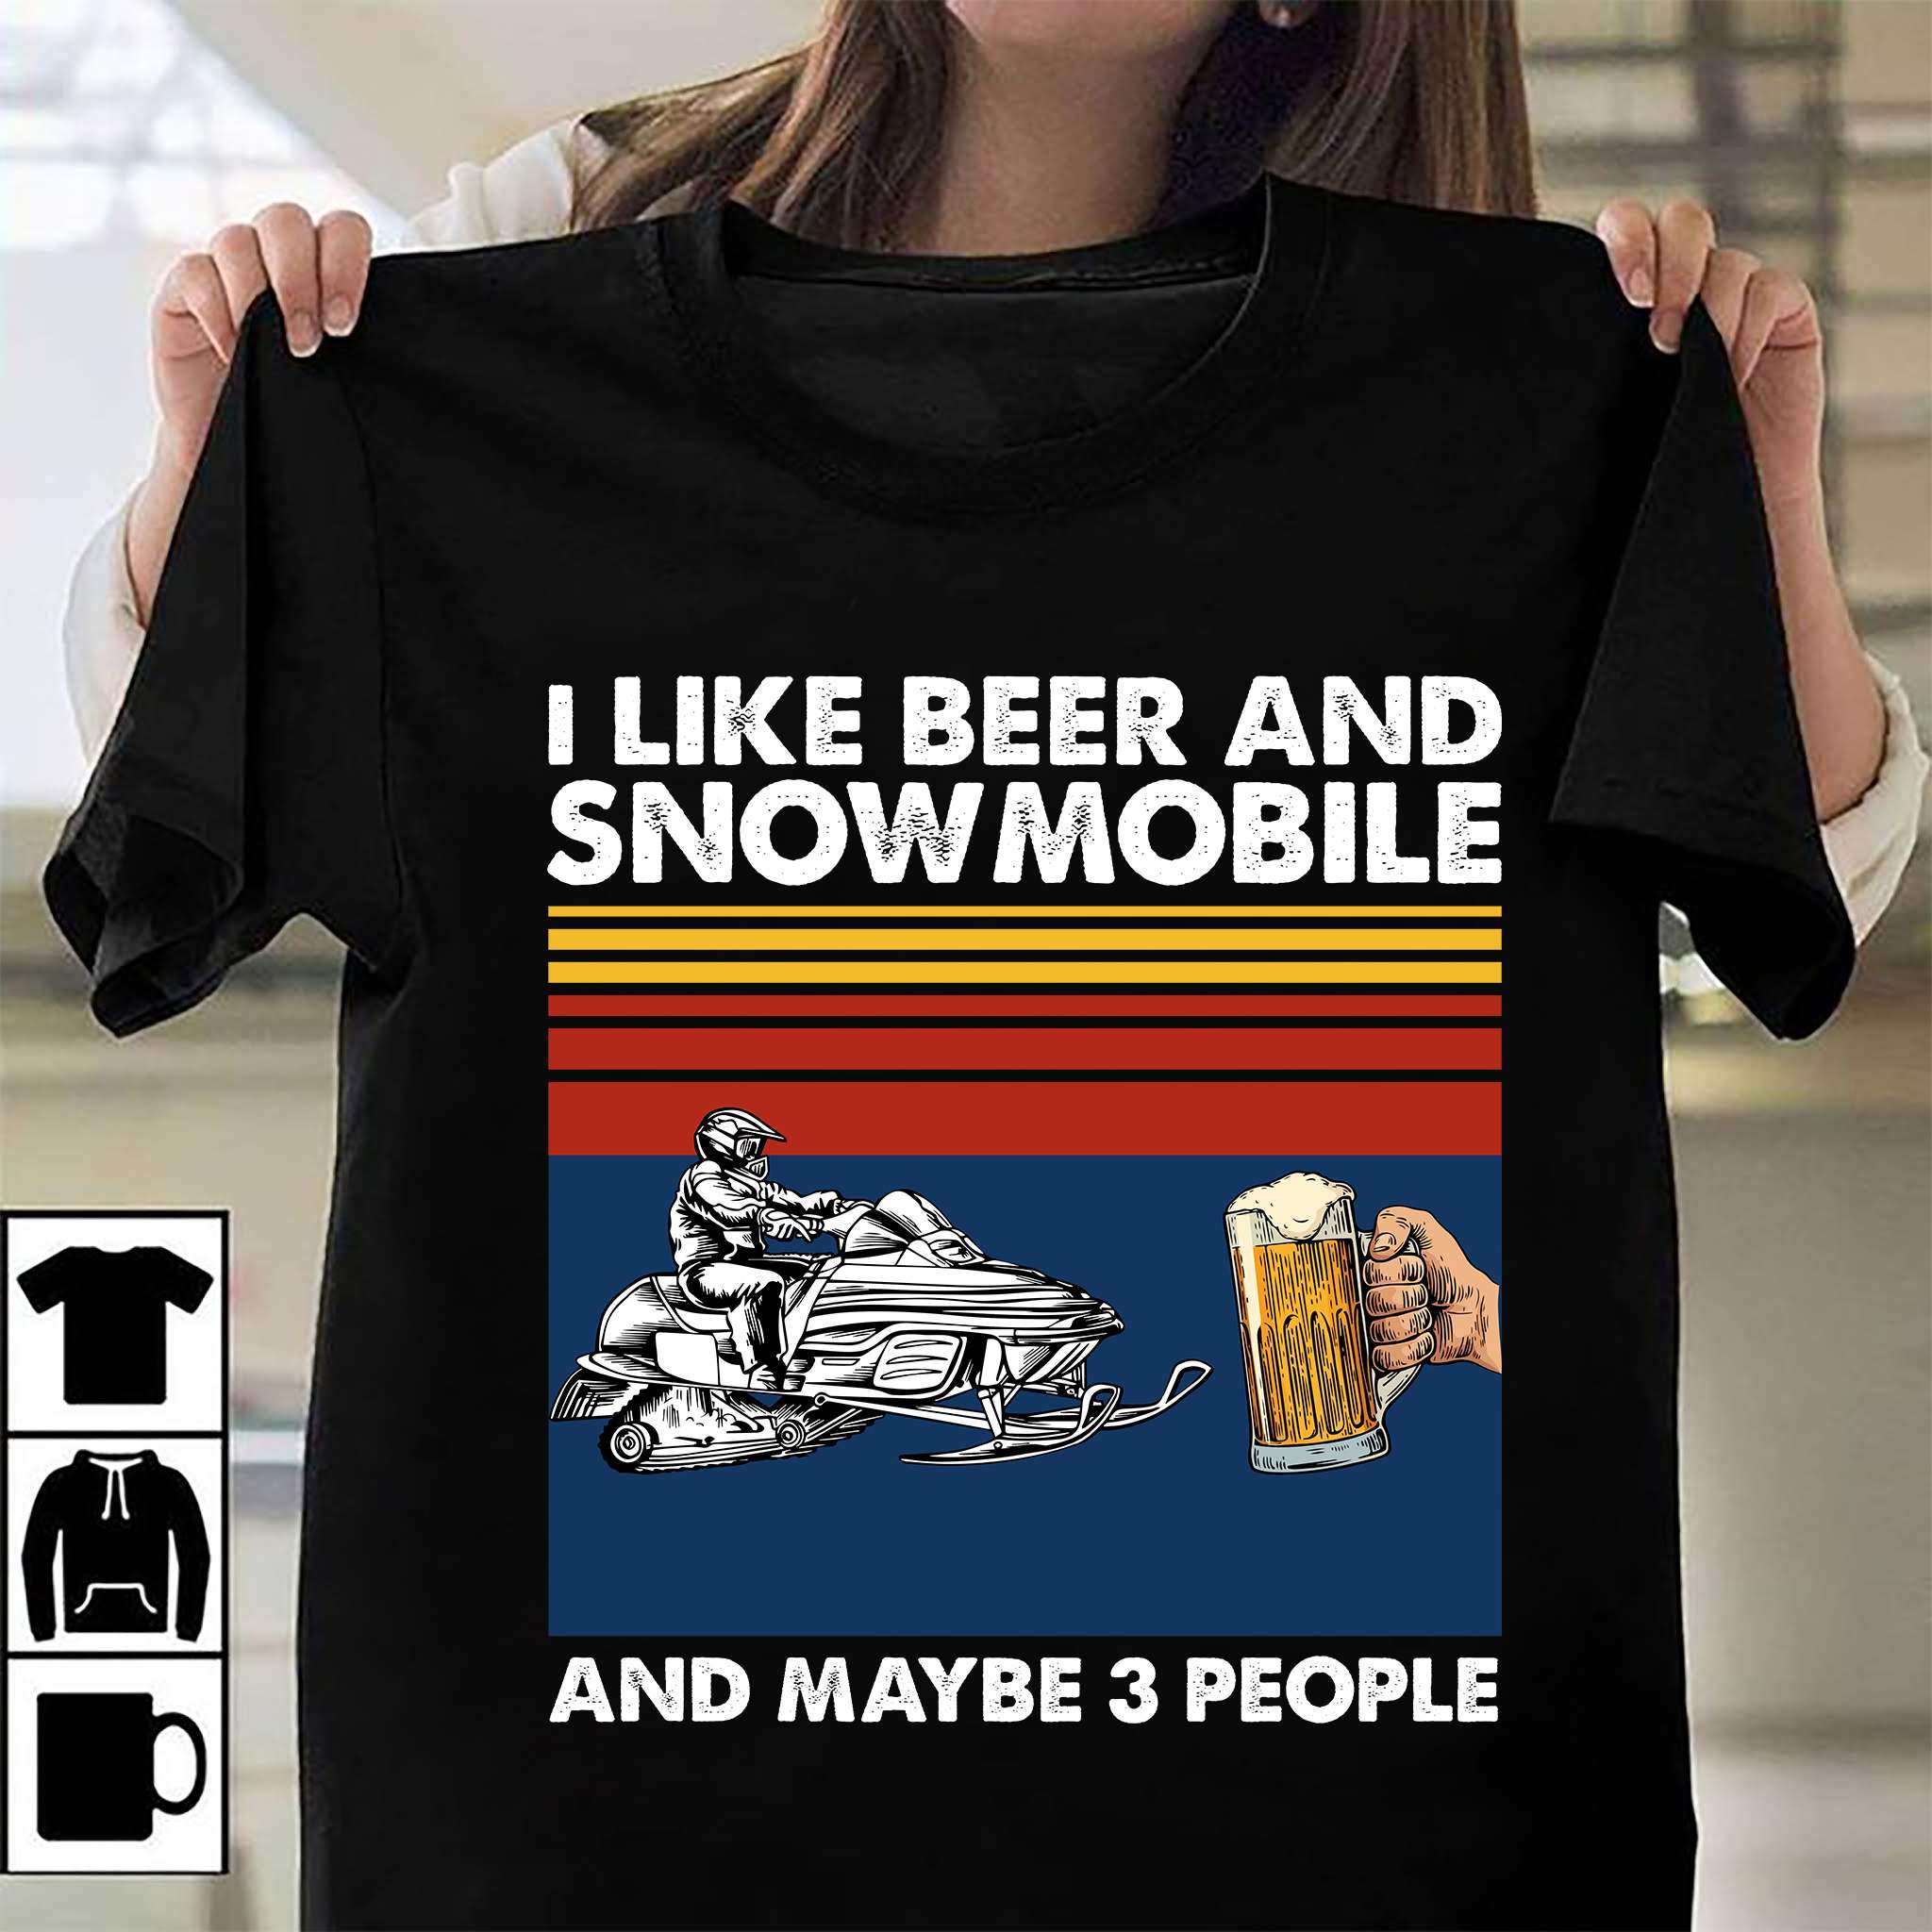 I like beer and snowmobile and maybe 3 people - Man riding snowmobile, riding and drinking hobby